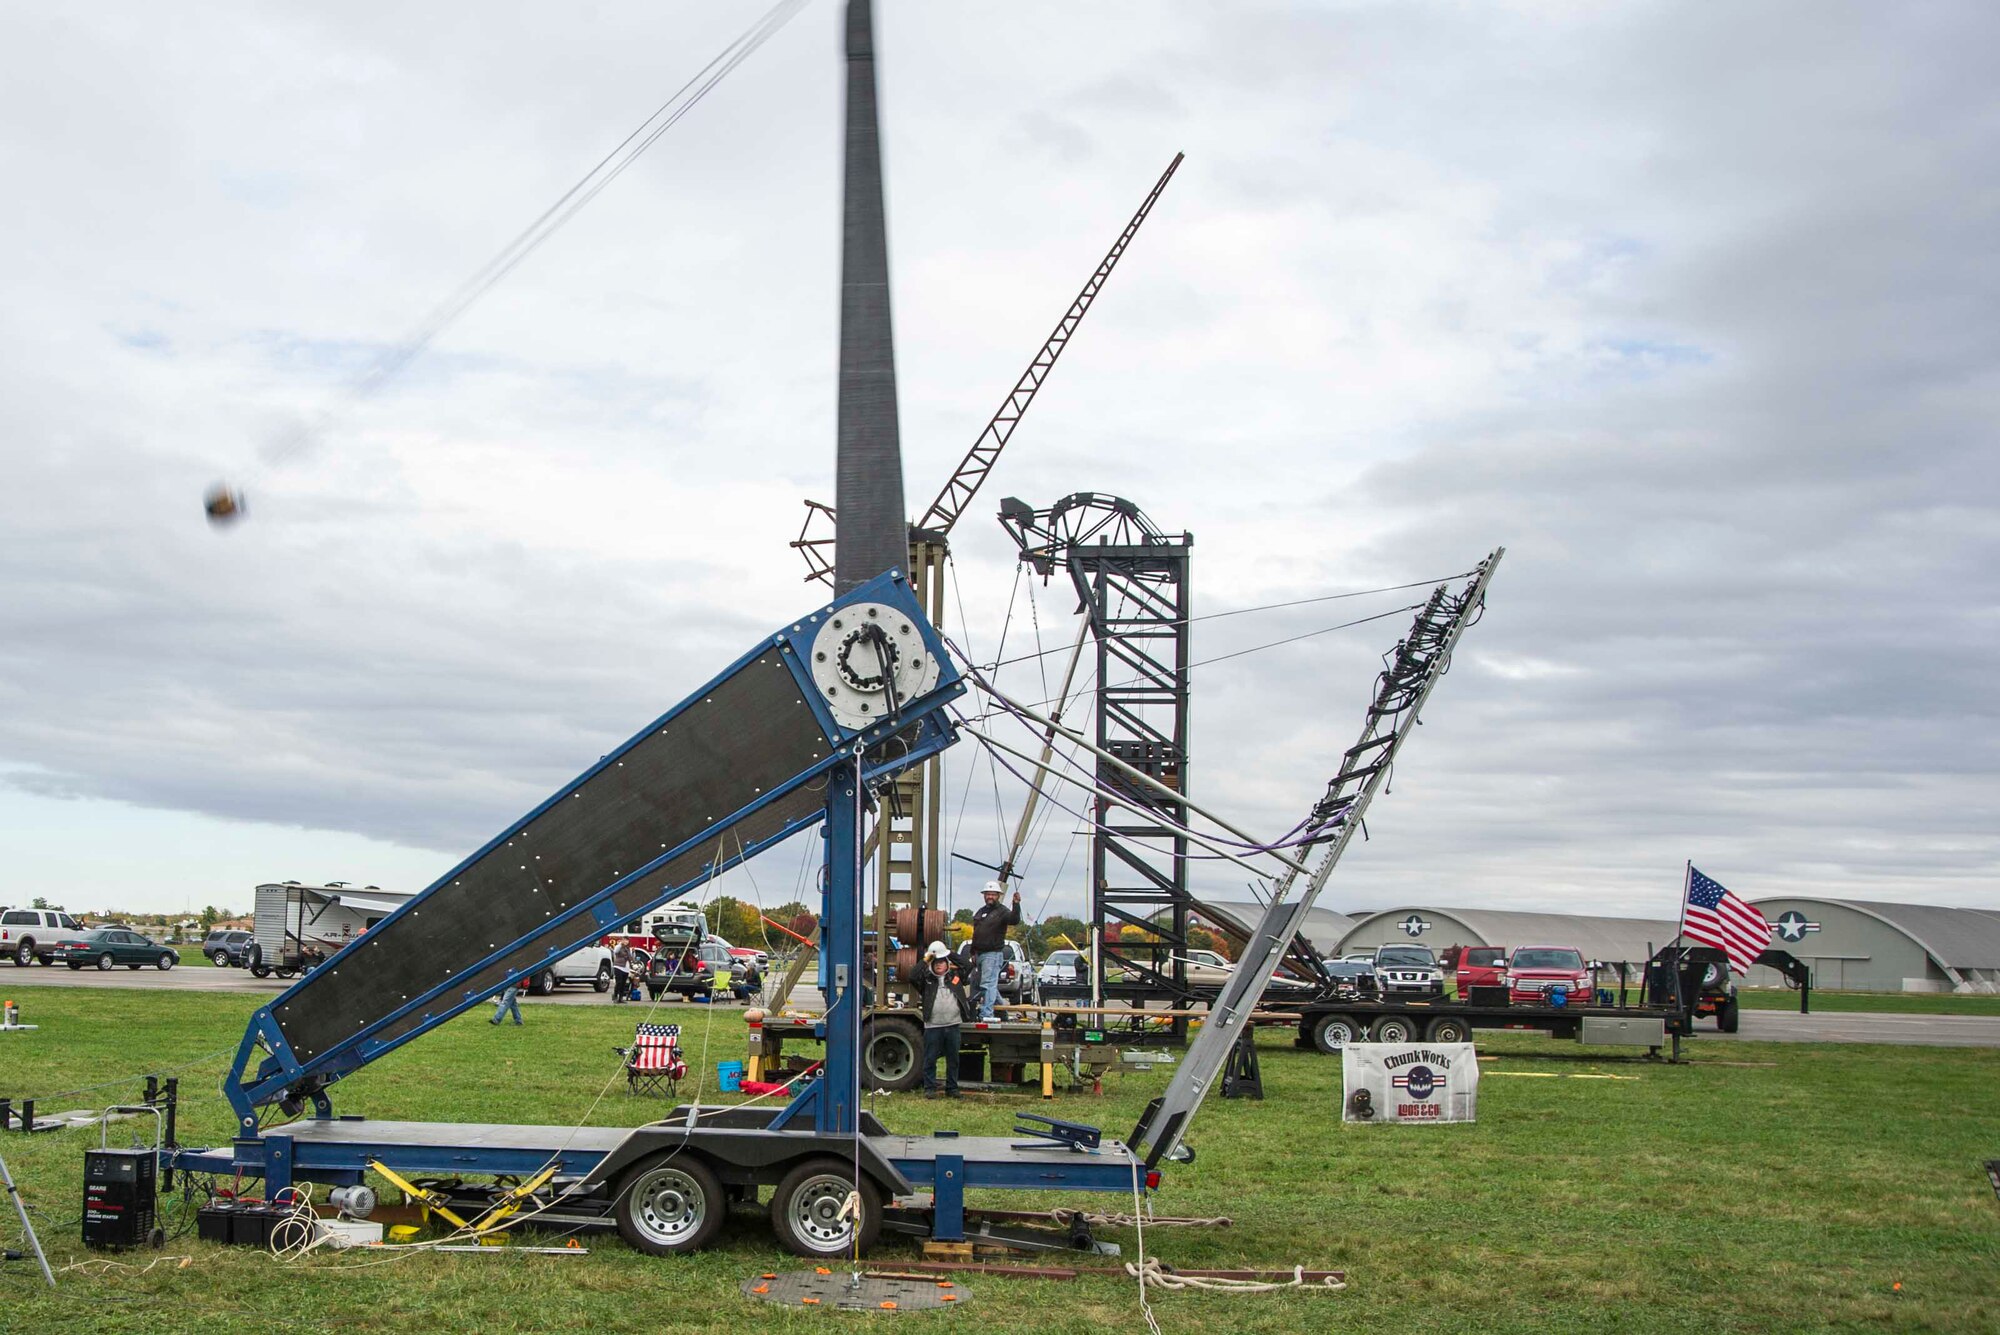 Team ETHOS’ The Phoenix machine (foreground) launches a 10-pound pumpkin downrange at the 12th Annual Pumpkin Chuck, Oct. 21, 2016 behind the National Museum of the United States Air Force at Wright-Patterson Air Force Base, Ohio. The Phoenix is an experimental torsion hybrid which uses the torque of twisted ropes for its throwing power. (U.S. Air Force photo/R.J. Oriez)